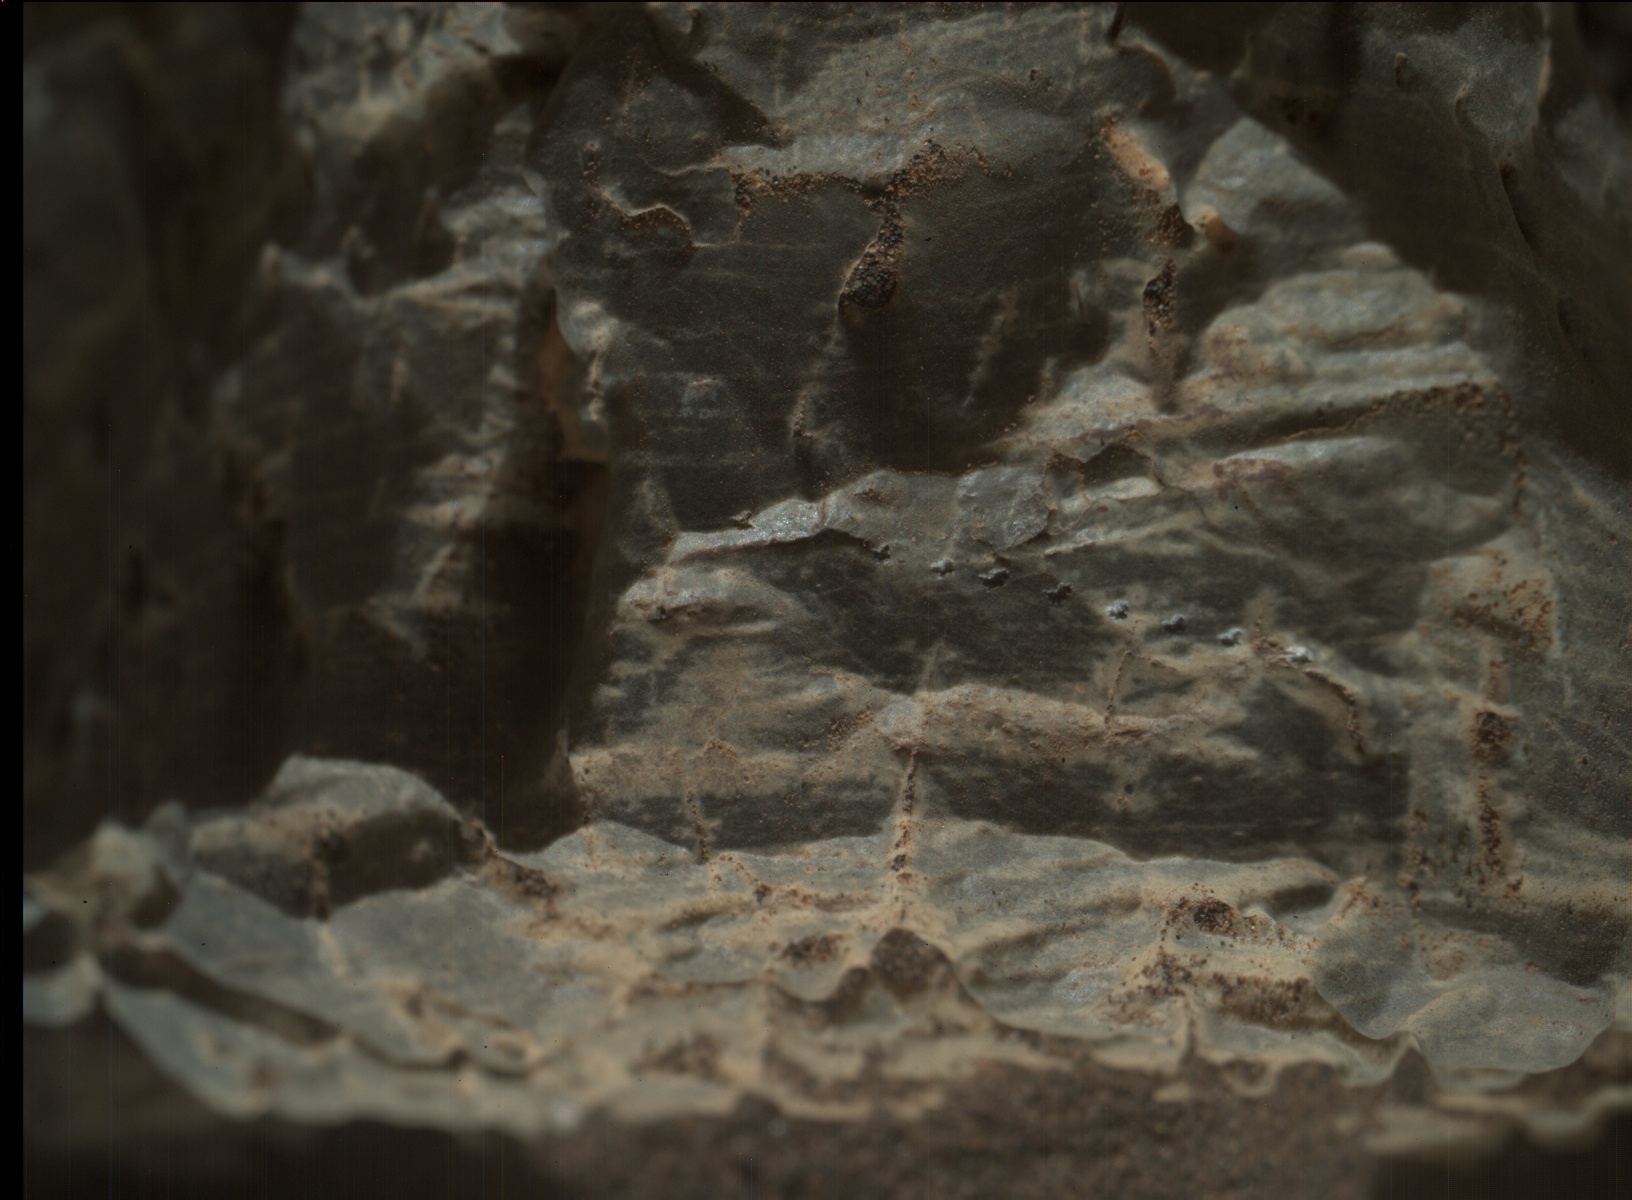 Nasa's Mars rover Curiosity acquired this image using its Mars Hand Lens Imager (MAHLI) on Sol 2019